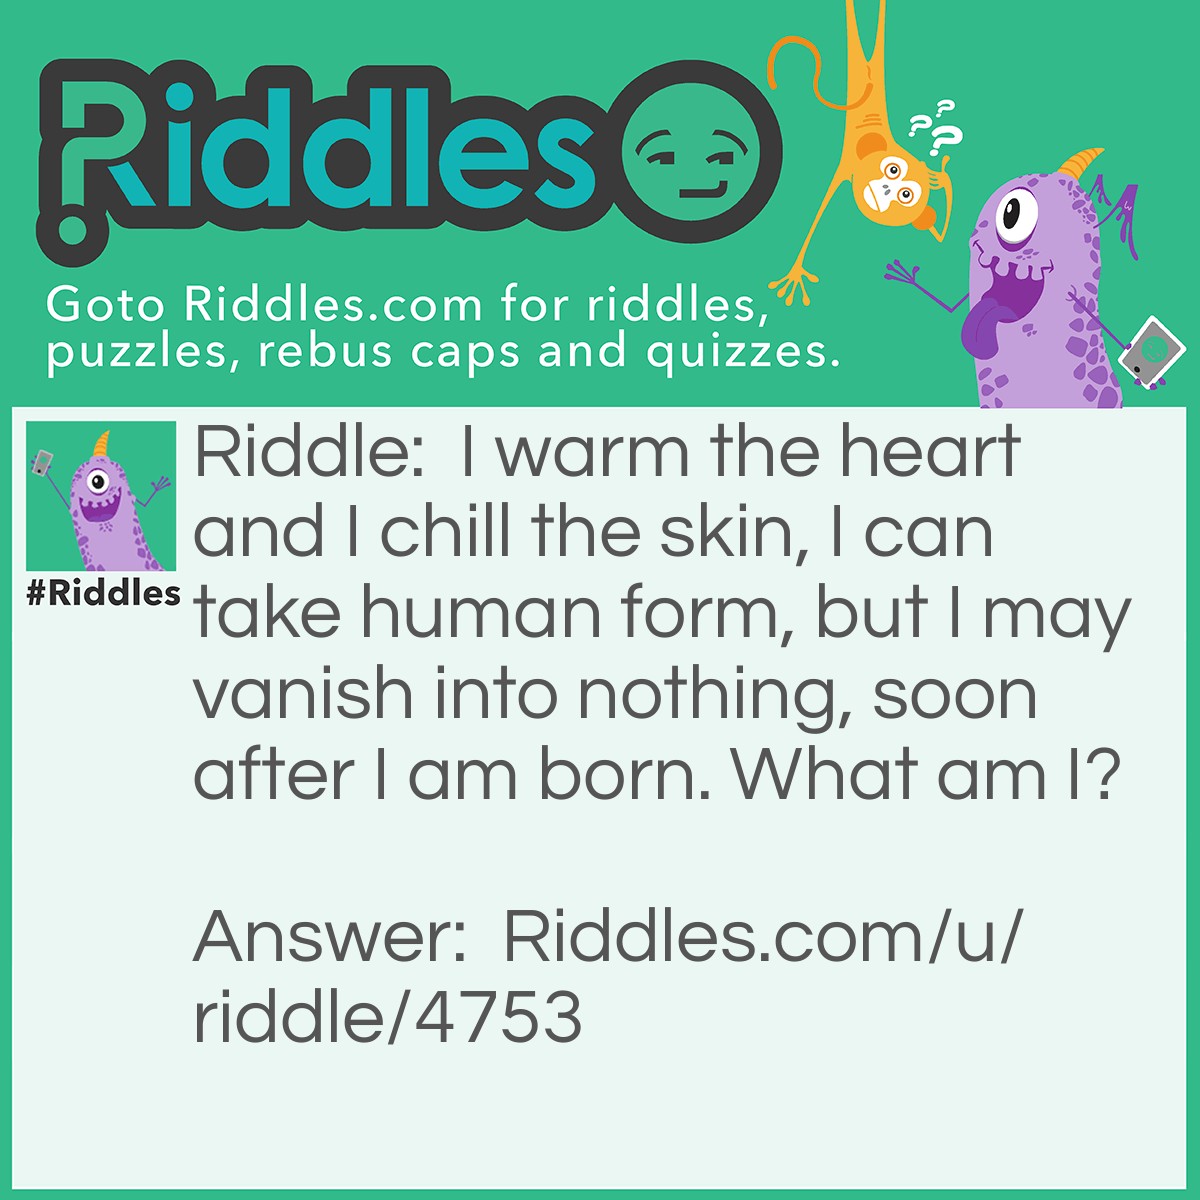 Riddle: I warm the heart and I chill the skin, I can take human form, but I may vanish into nothing, soon after I am born. What am I? Answer: A snowman.